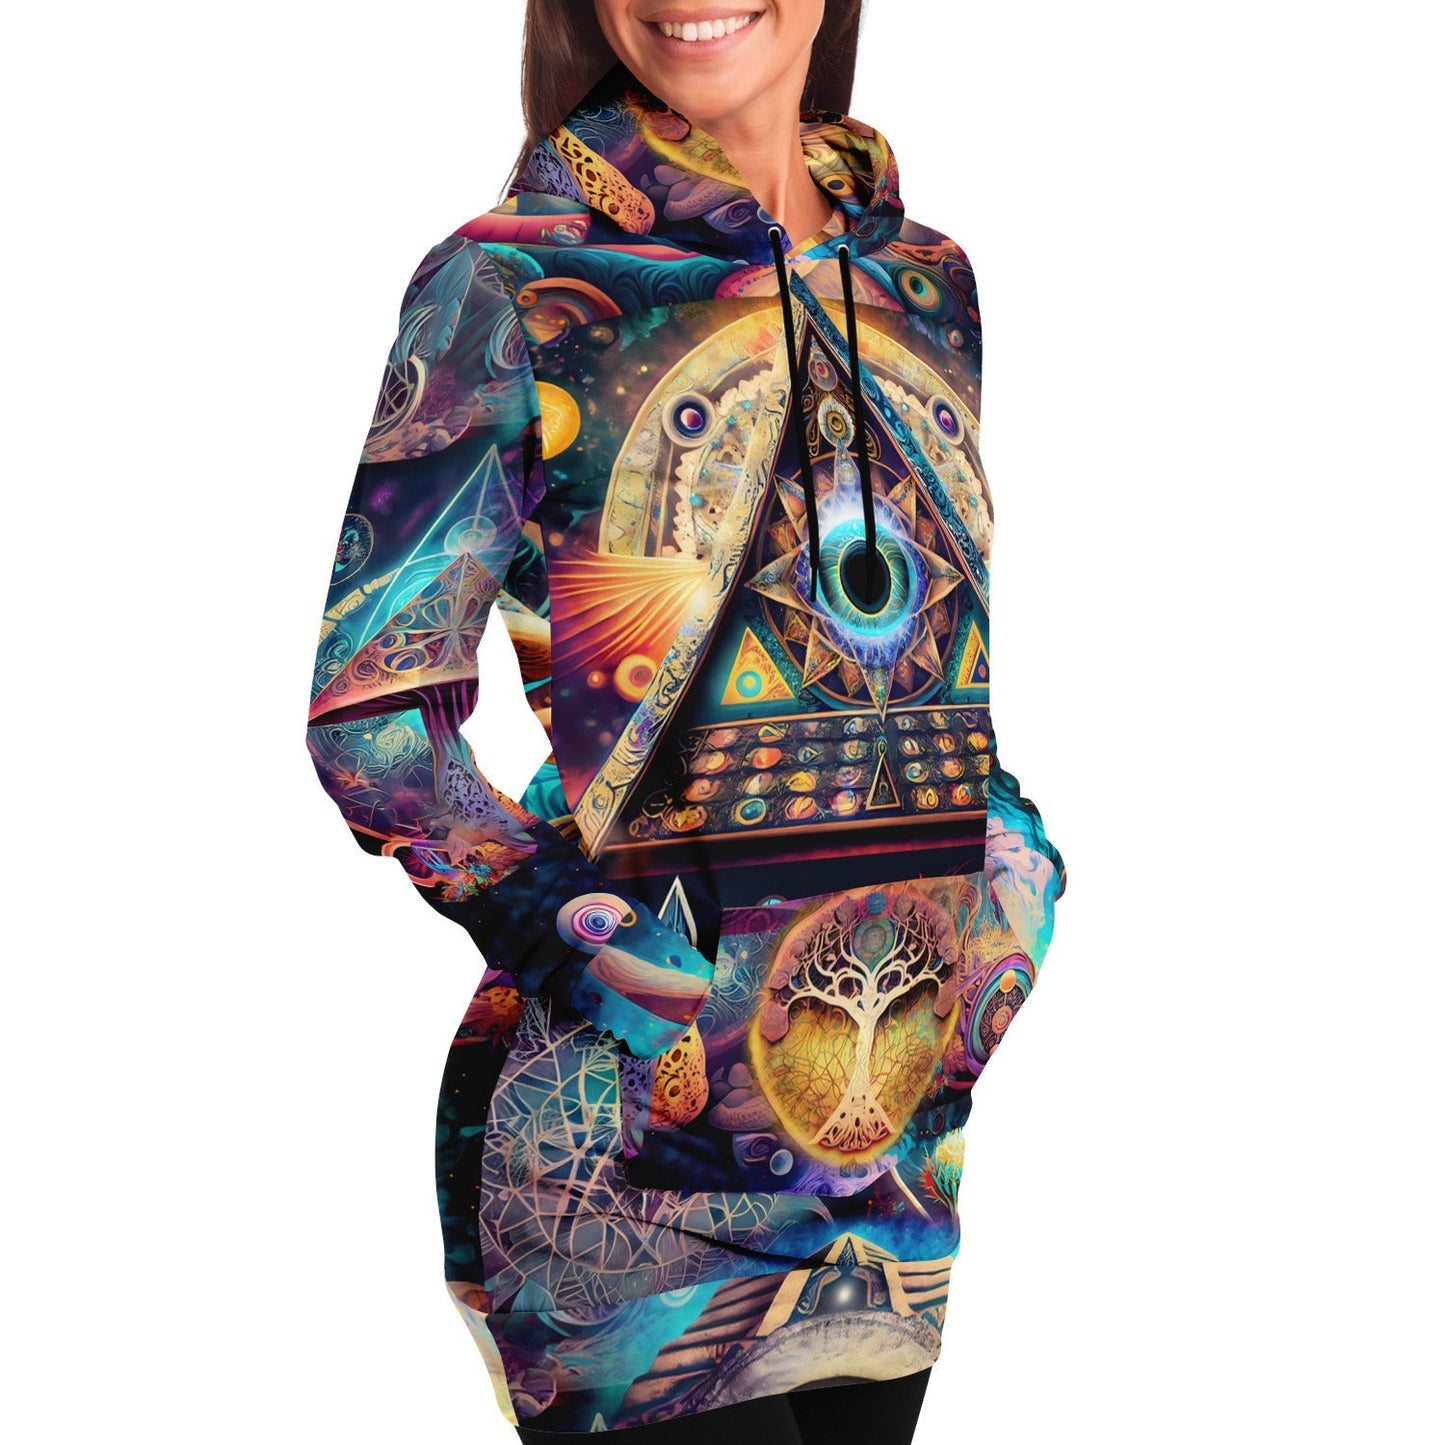 Athletic Longline Hoodie Dress with a Cosmic Eye, Ancient Pyramids, Esoteric Symbol HOO-DESIGN.SHOP